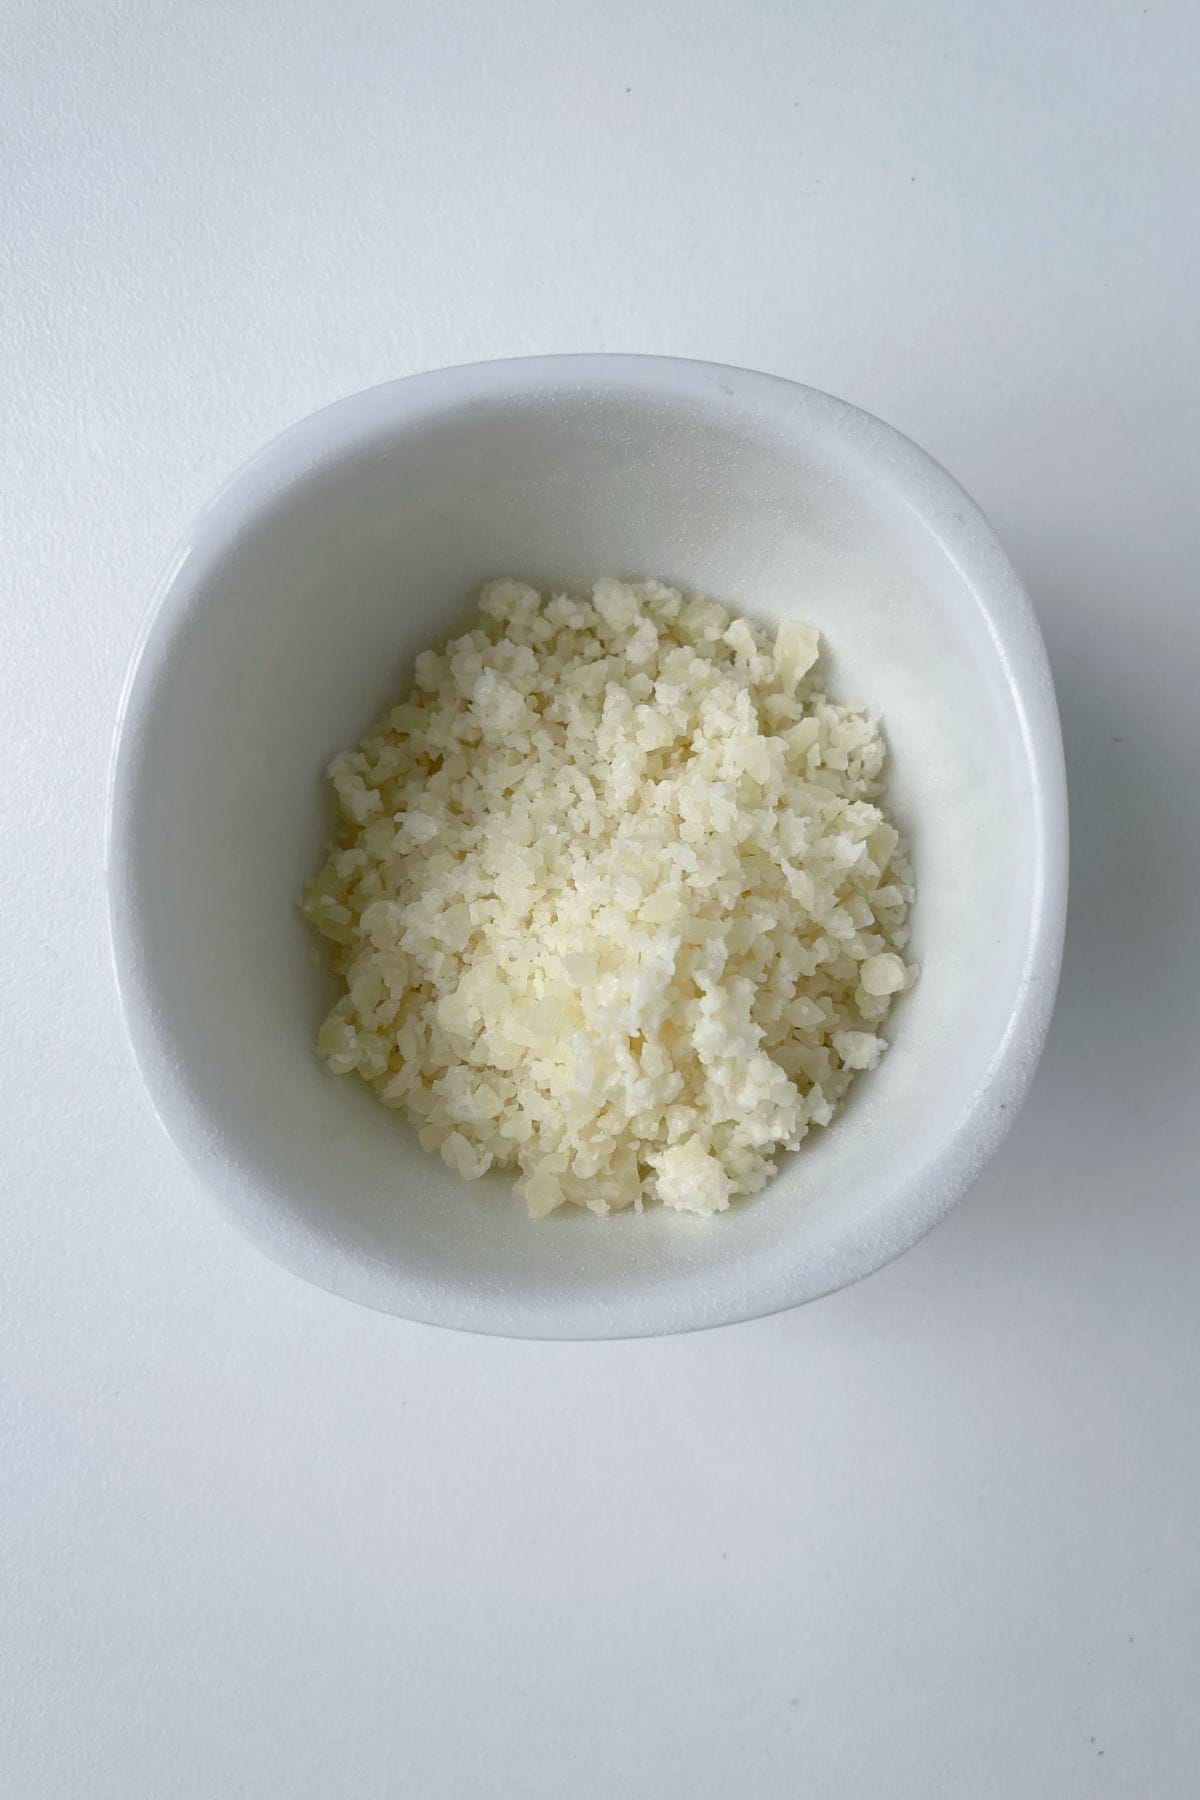 Grated cheese in a white bowl.